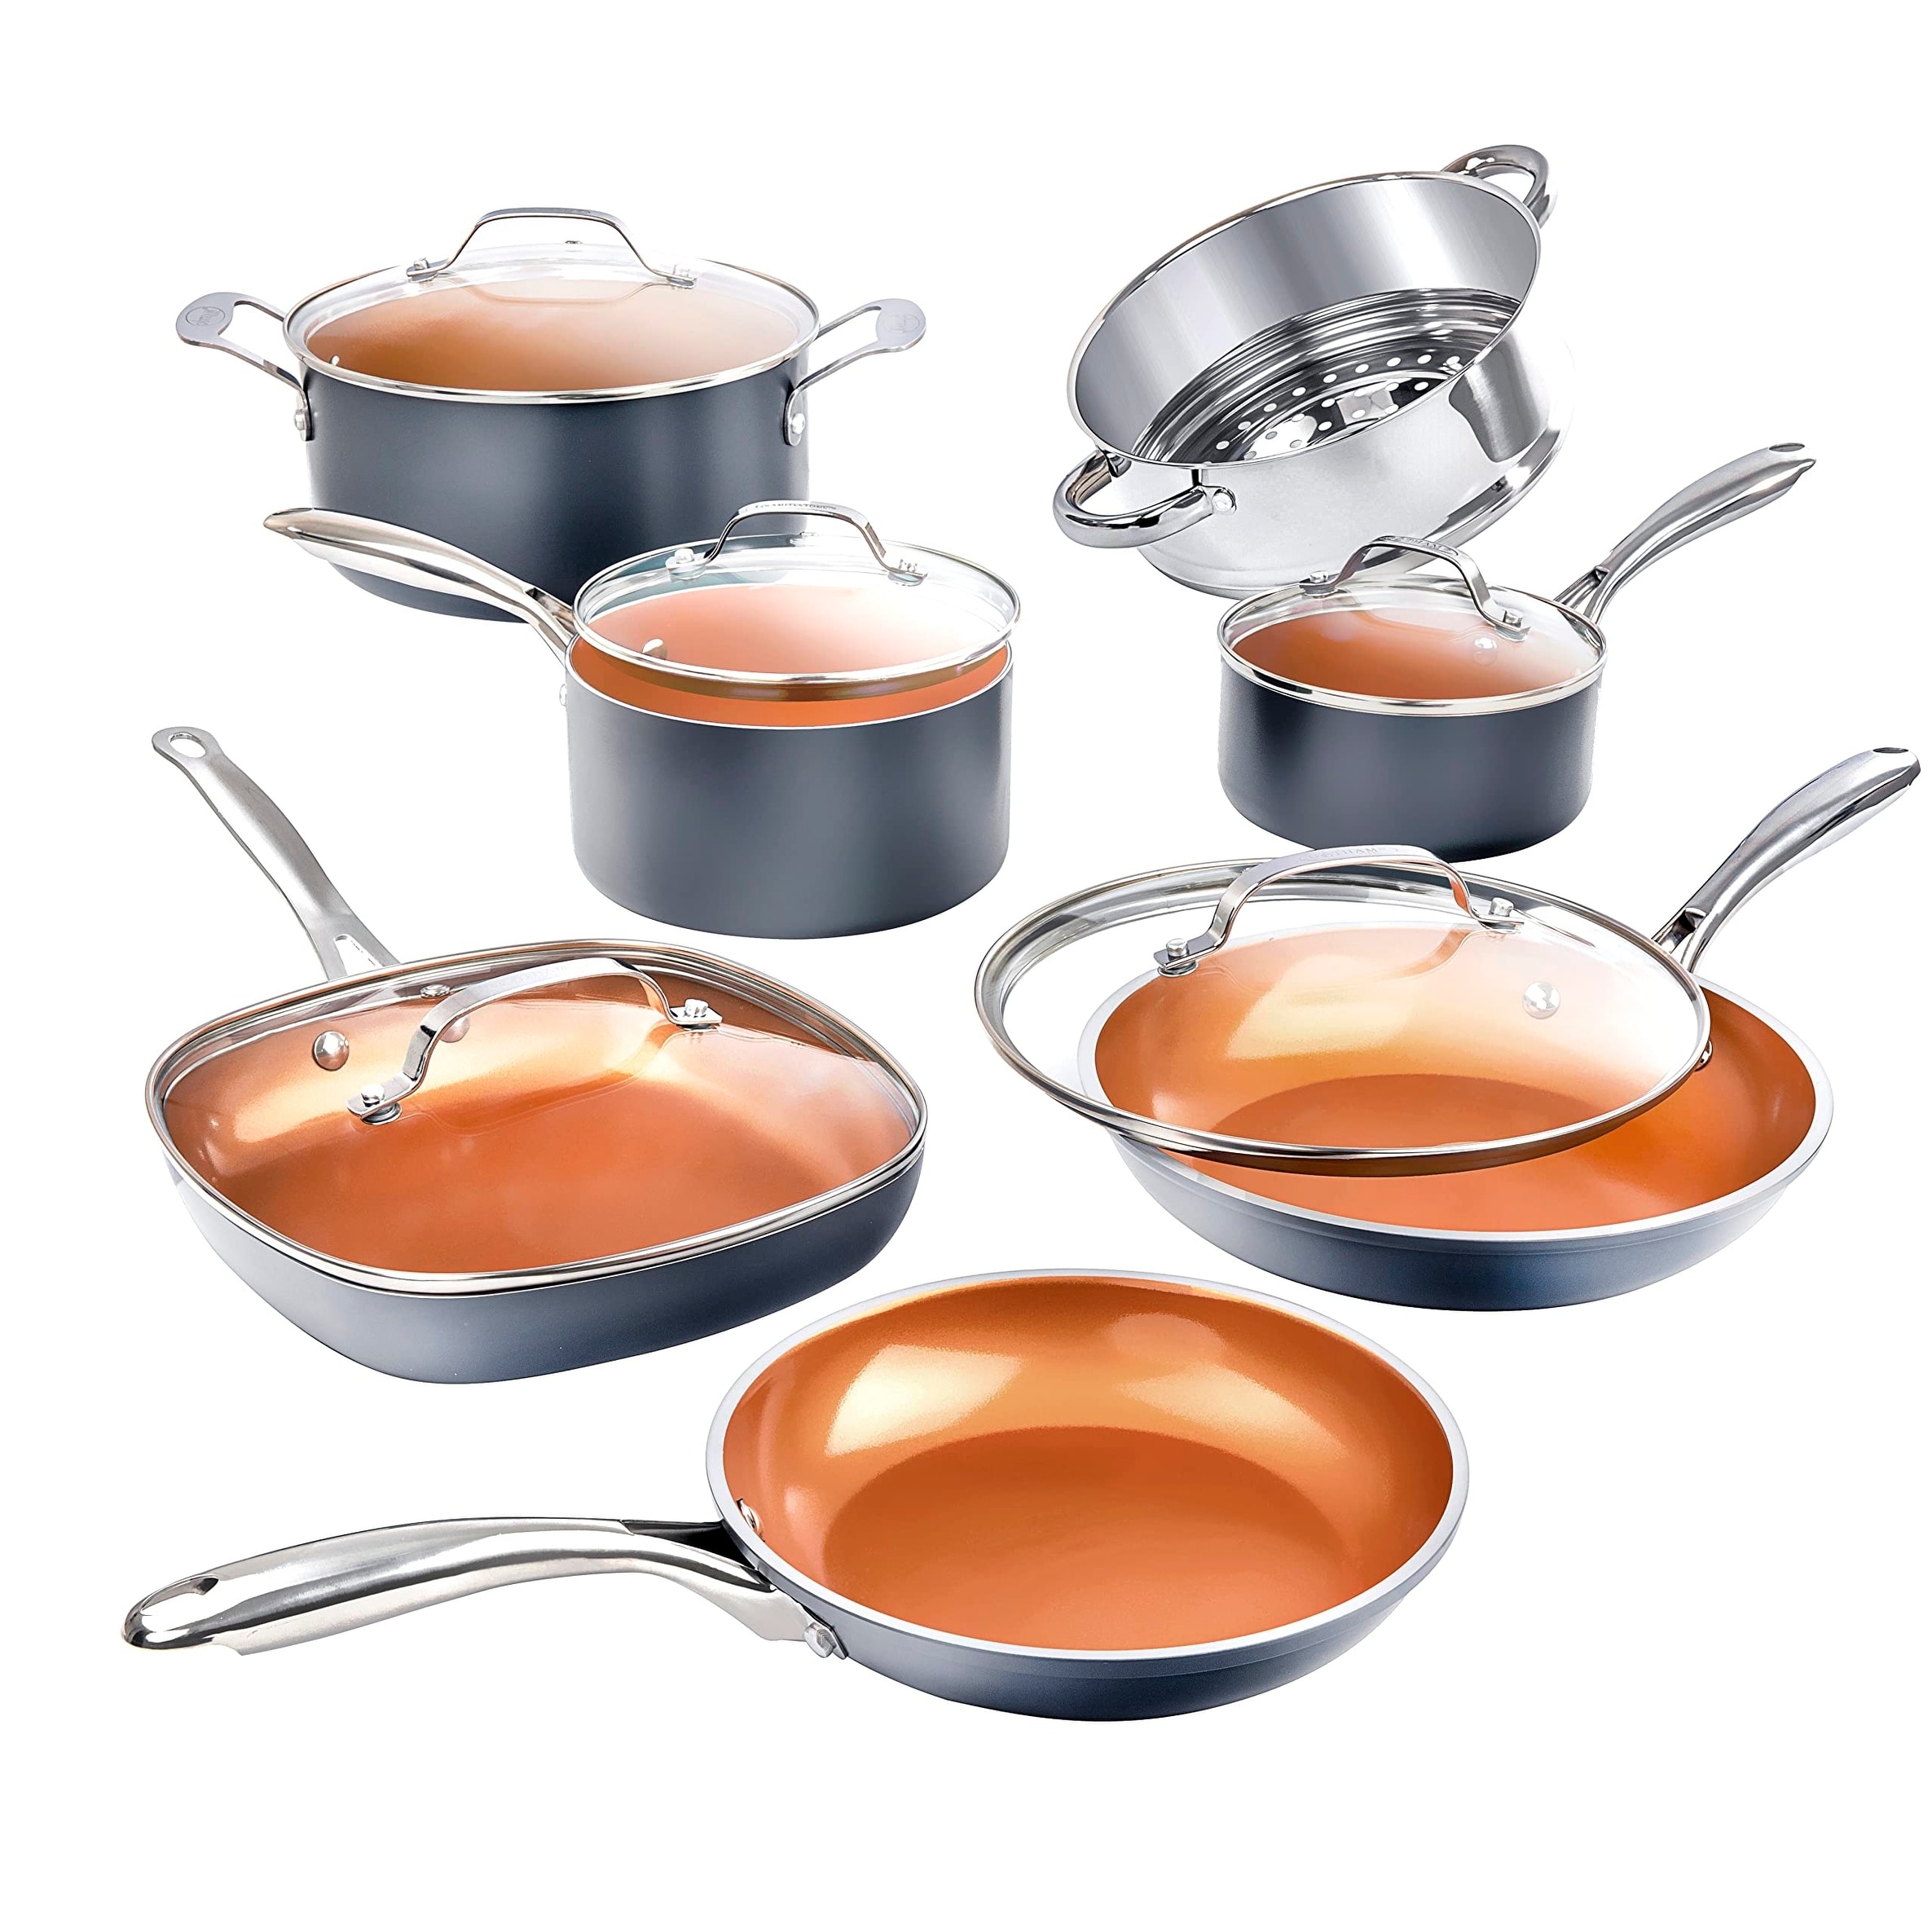 https://ak1.ostkcdn.com/images/products/is/images/direct/c434a1452ff68b8417220447286e28dbe5b5b0d1/Pots-and-Pans-Set-12-Piece-Cookware-Set-with-Ultra-Nonstick-Ceramic-Coating%2C-Stay-Cool-Handles%2C-Metal-Utensil-%26-Dishwasher-Safe.jpg